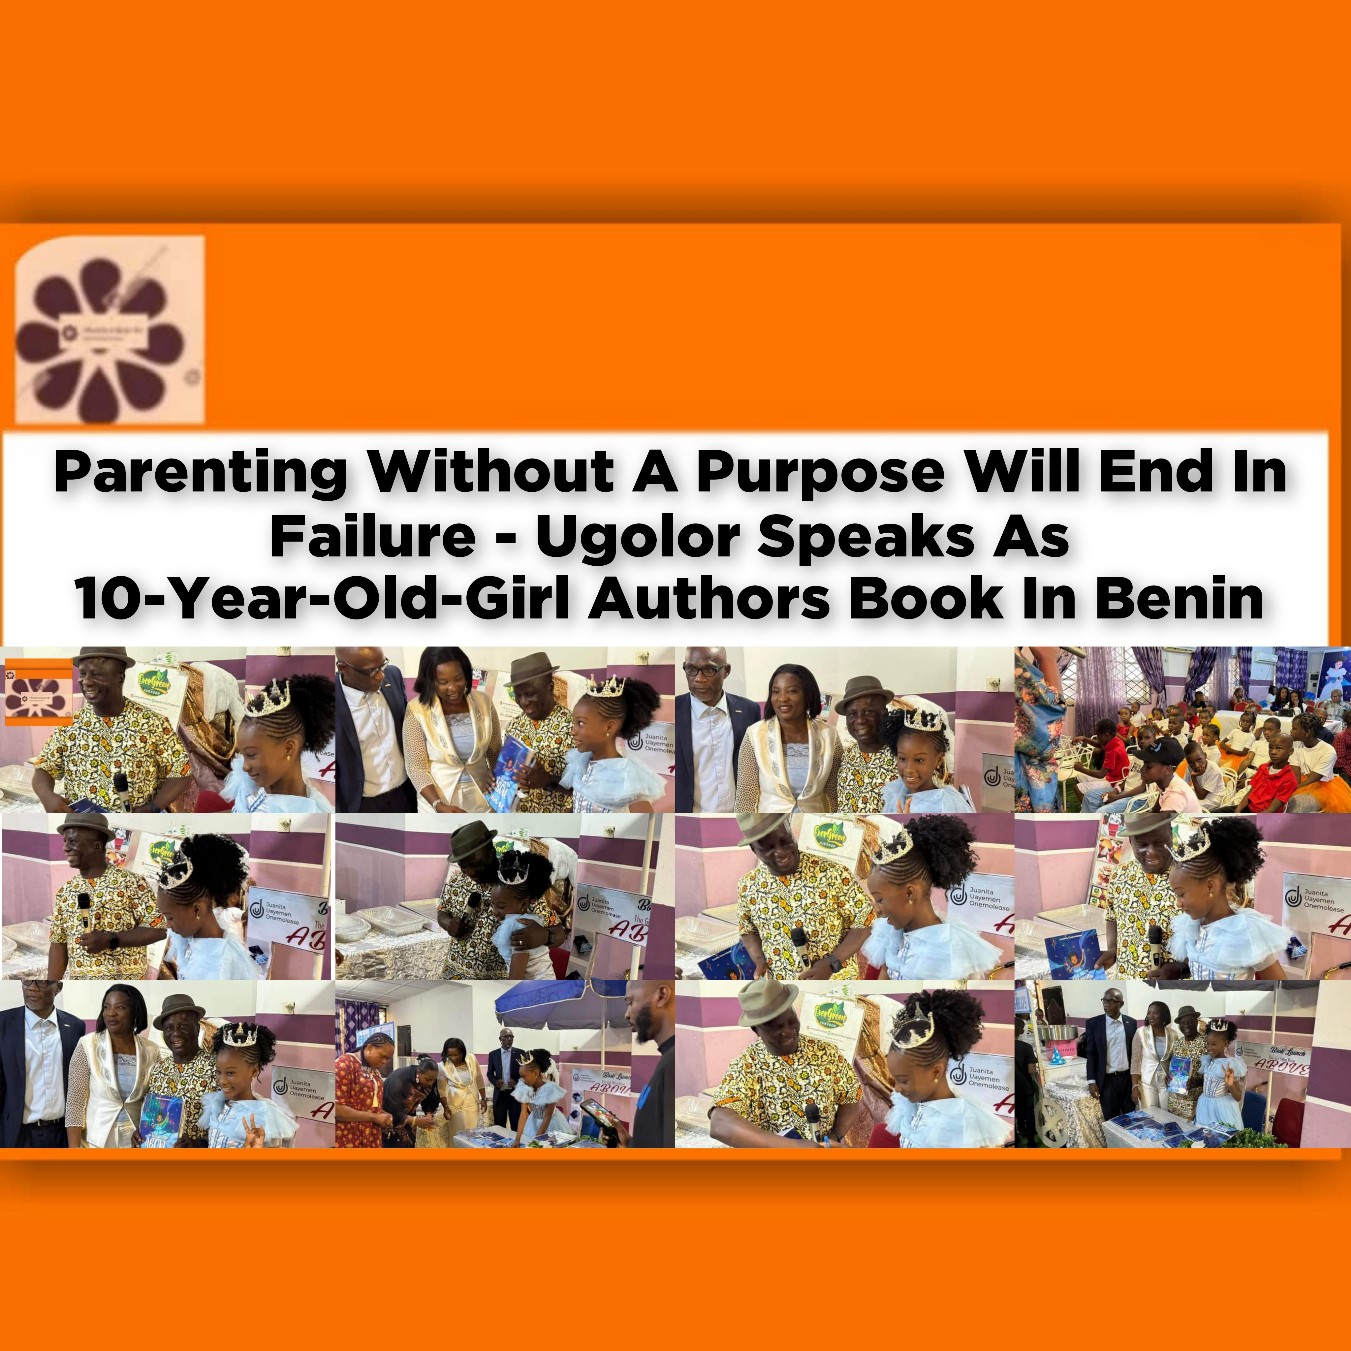 Parenting Without A Purpose Will End In Failure - Ugolor Speaks As 10-Year-Old-Girl Authors Book In Benin ~ OsazuwaAkonedo #North